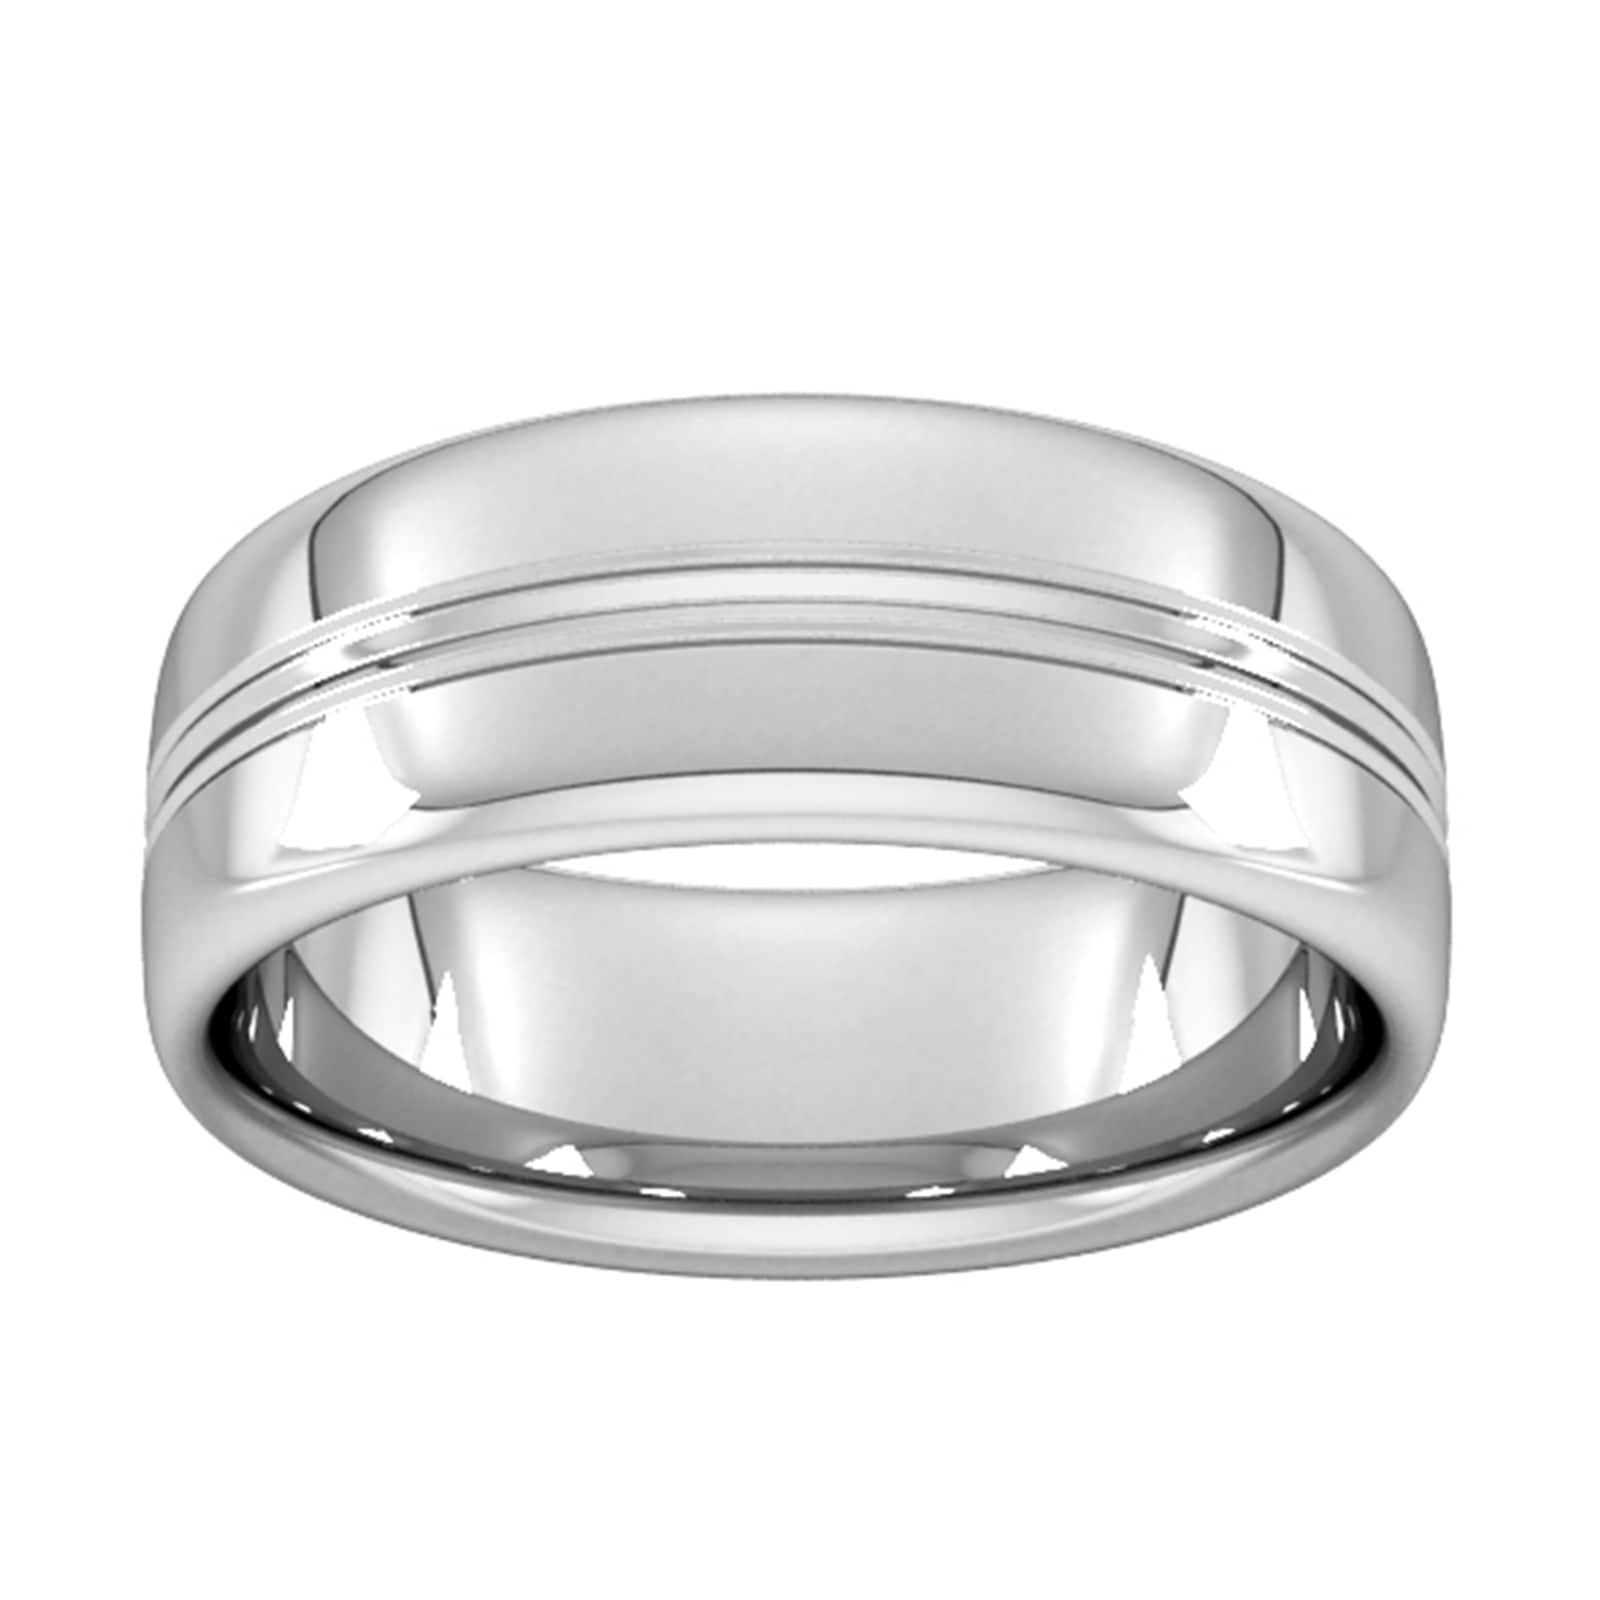 8mm Slight Court Standard Grooved Polished Finish Wedding Ring In Platinum - Ring Size M